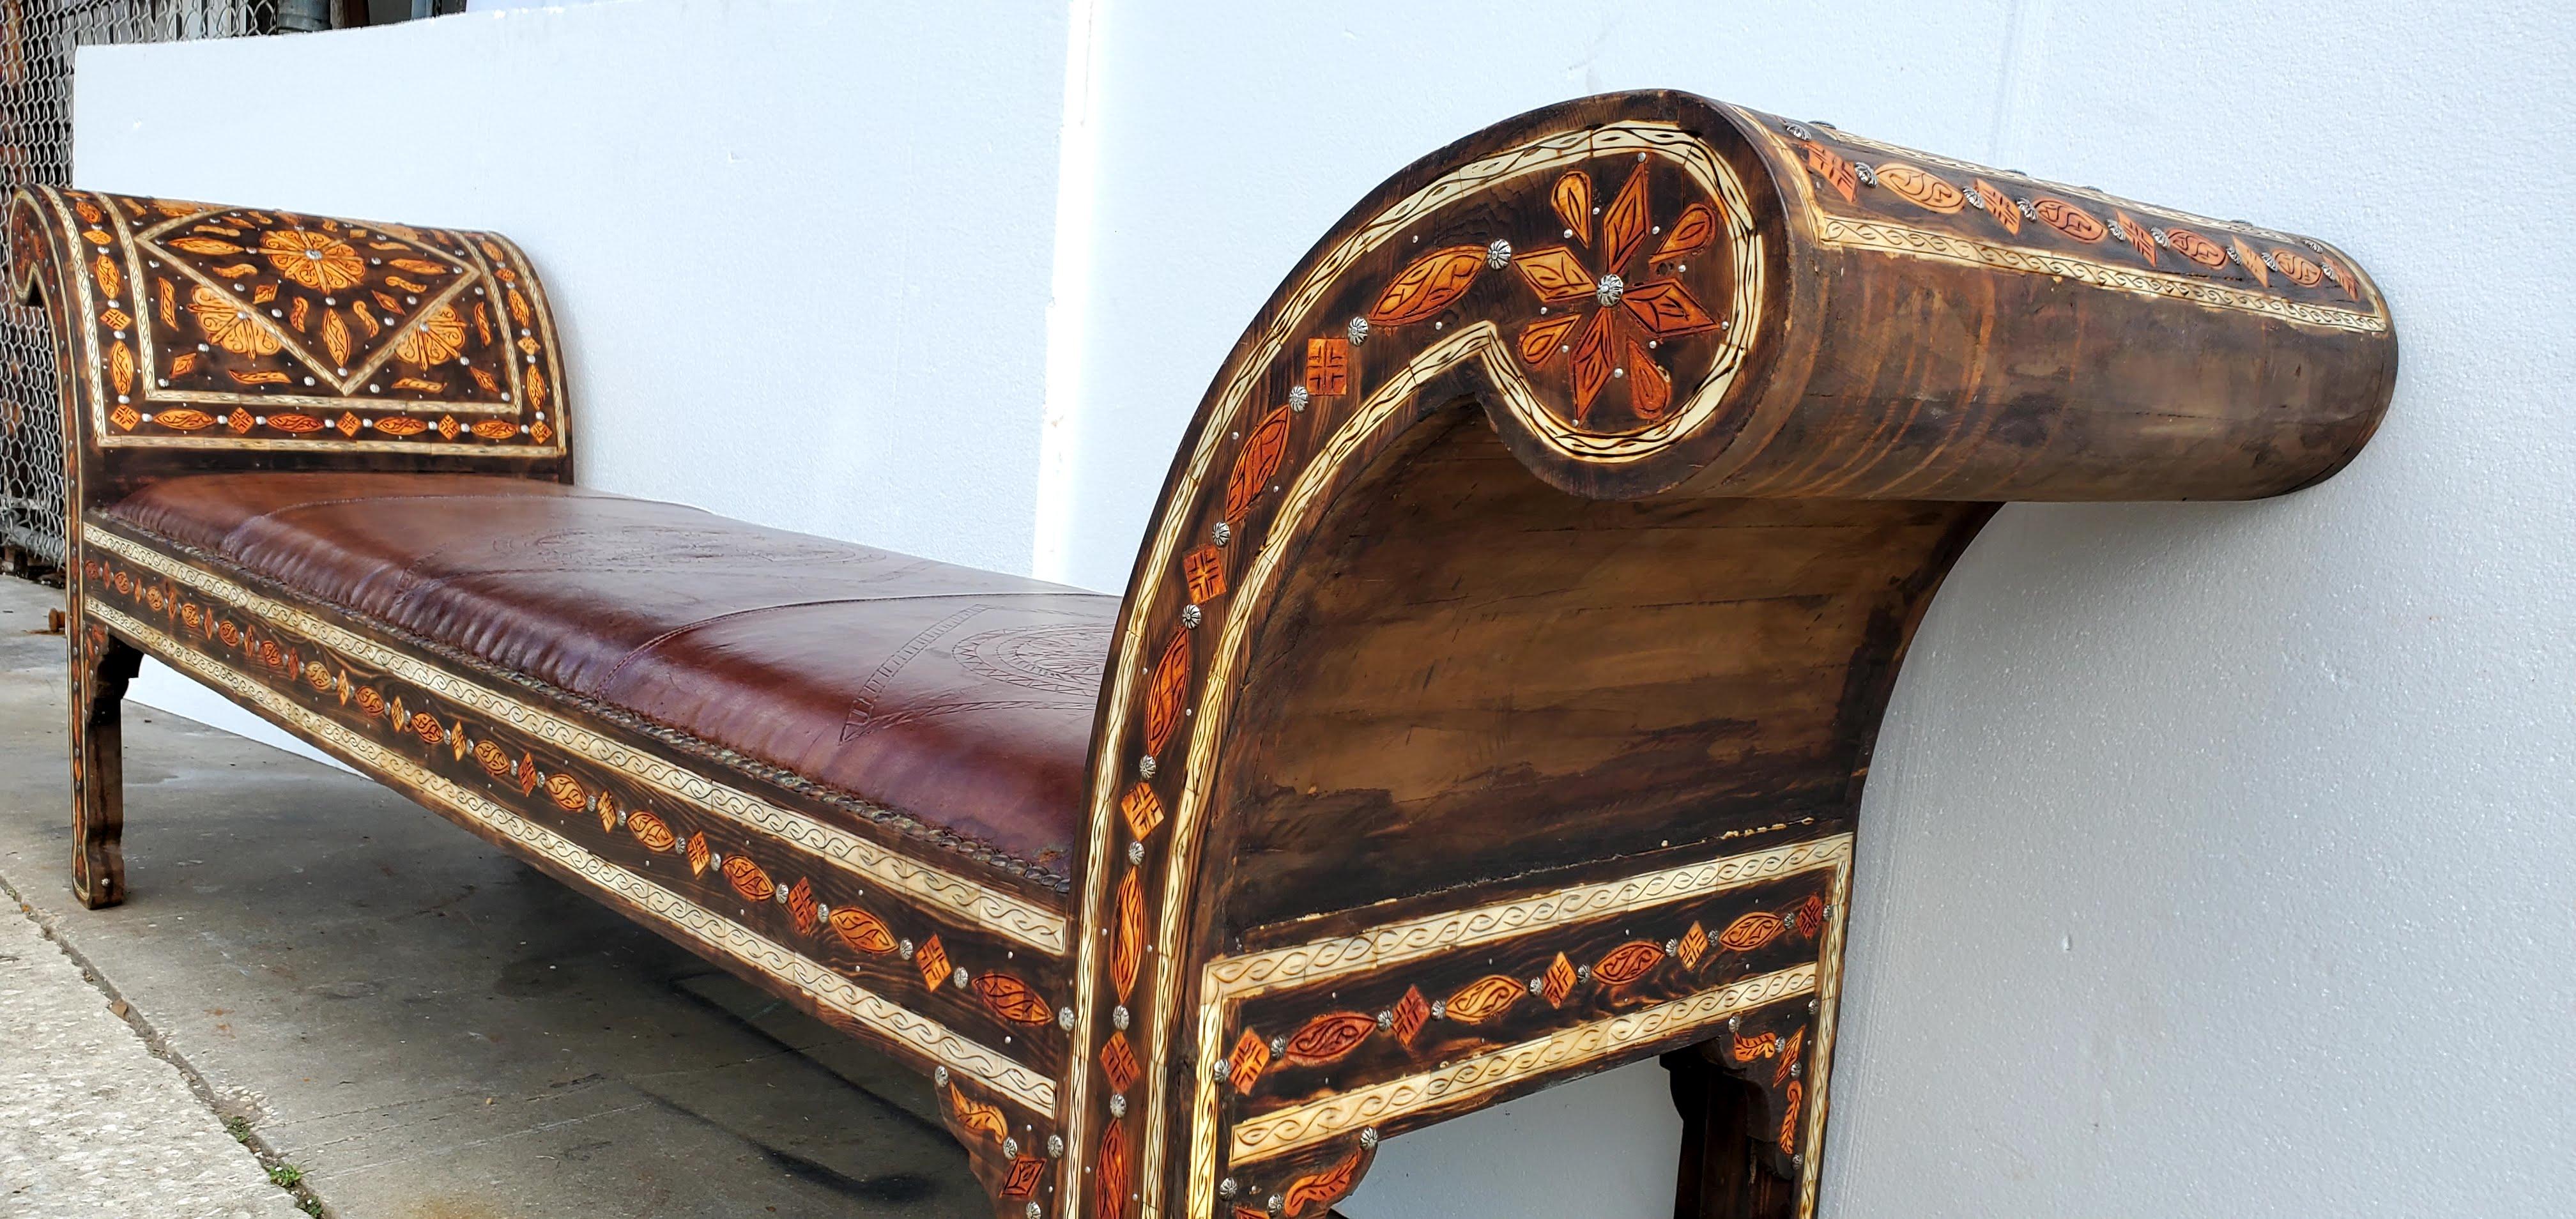 
Exquisite vintage royal inlaid camel bone bench reupholstered with hand tanned dark moroccan leather. Indigenous cedar inlaid with henna stained camel bone & all hand carved handmade by master artisans.A stunning piece of furniture for your living